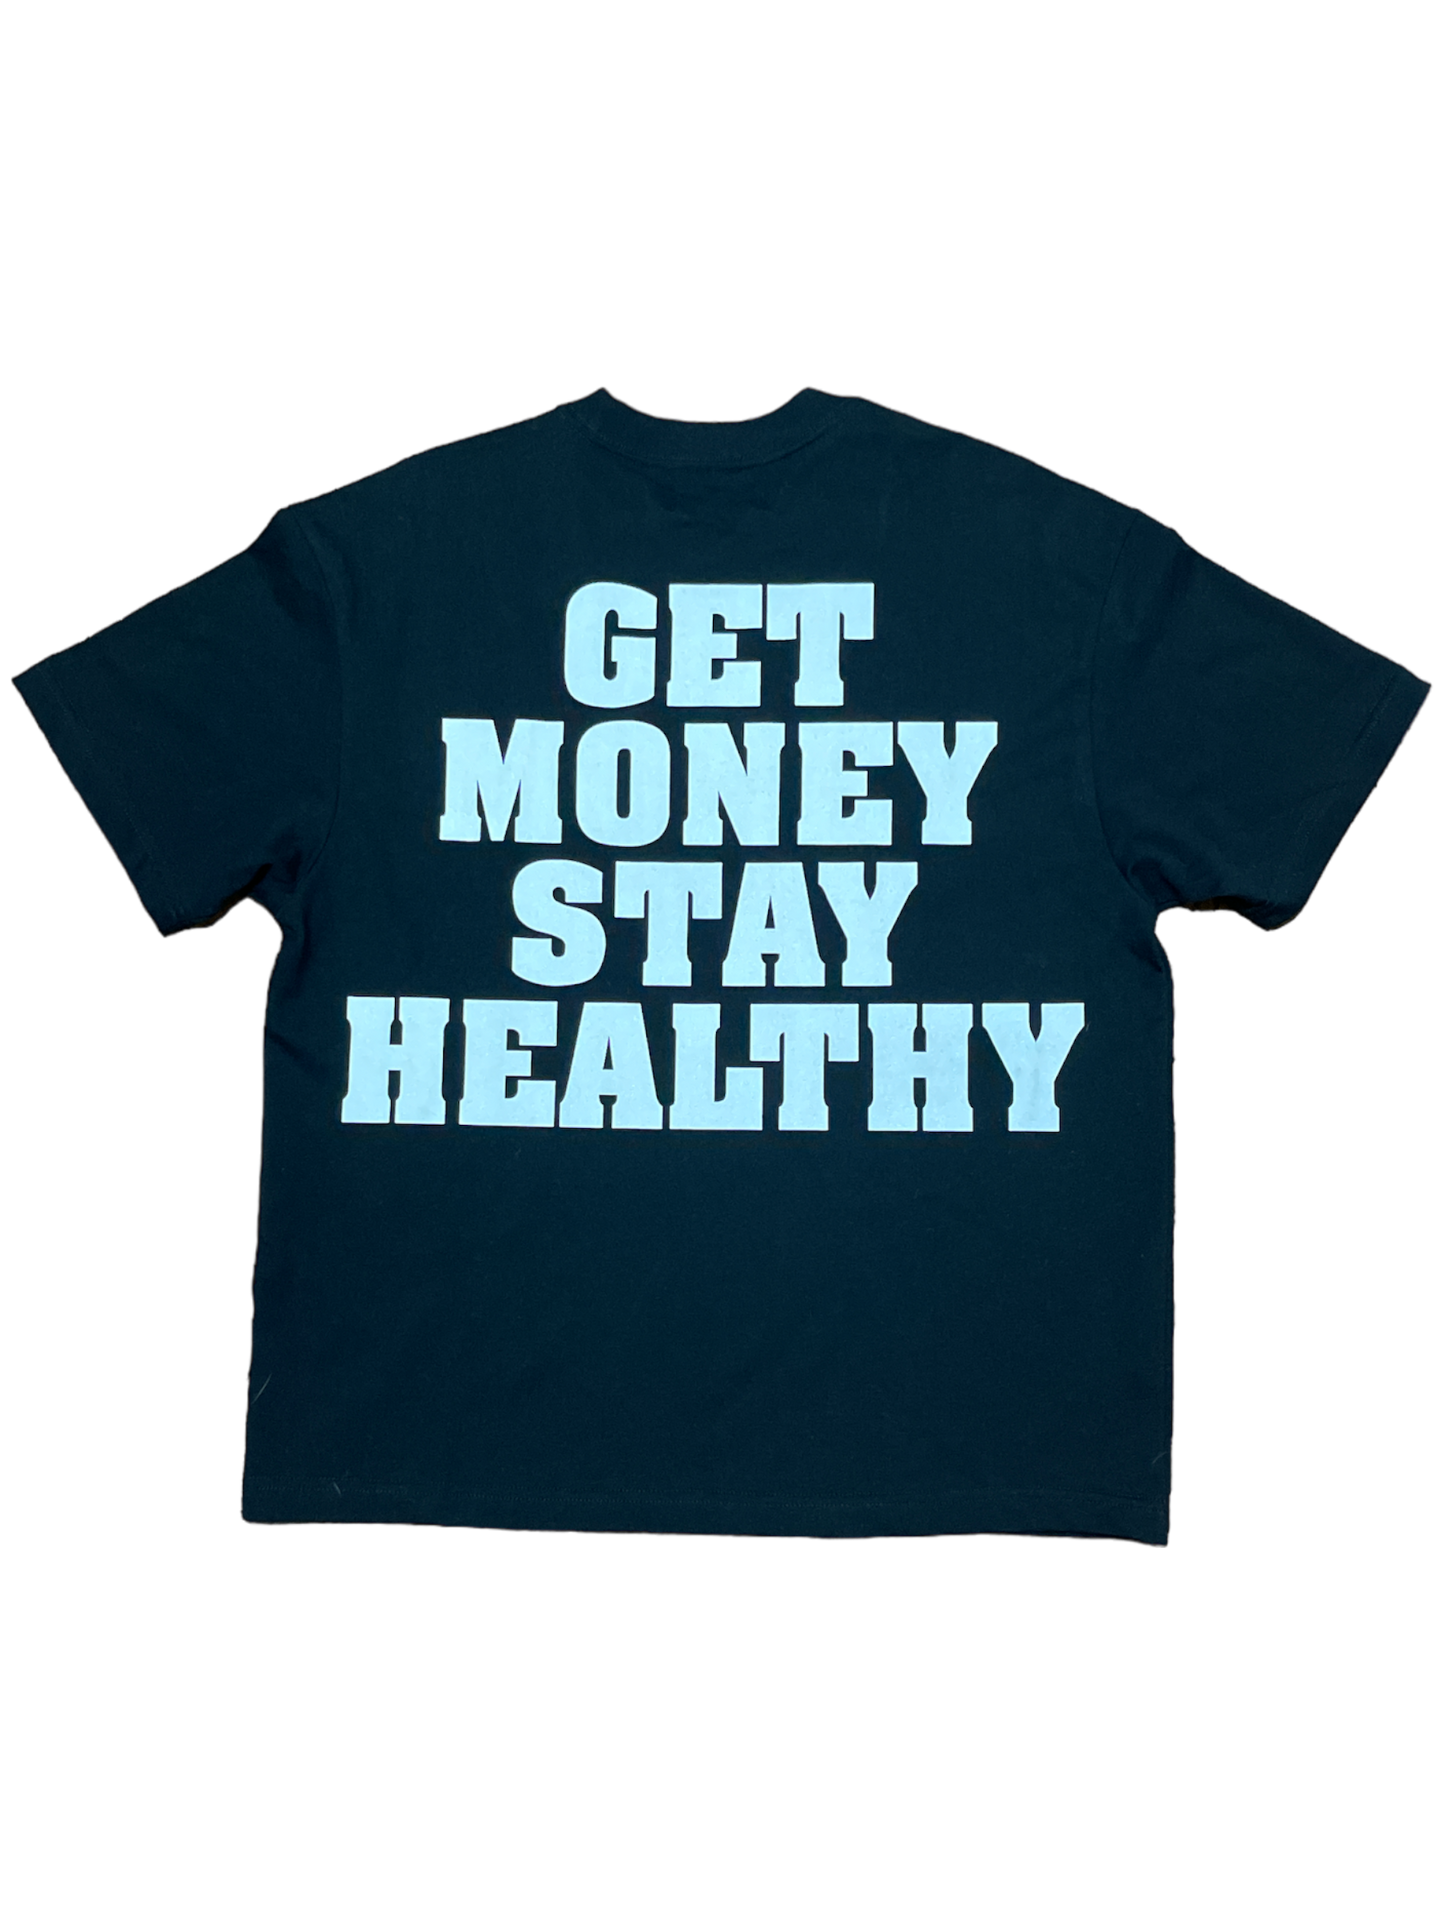 GET MONEY STAY HEALTHY